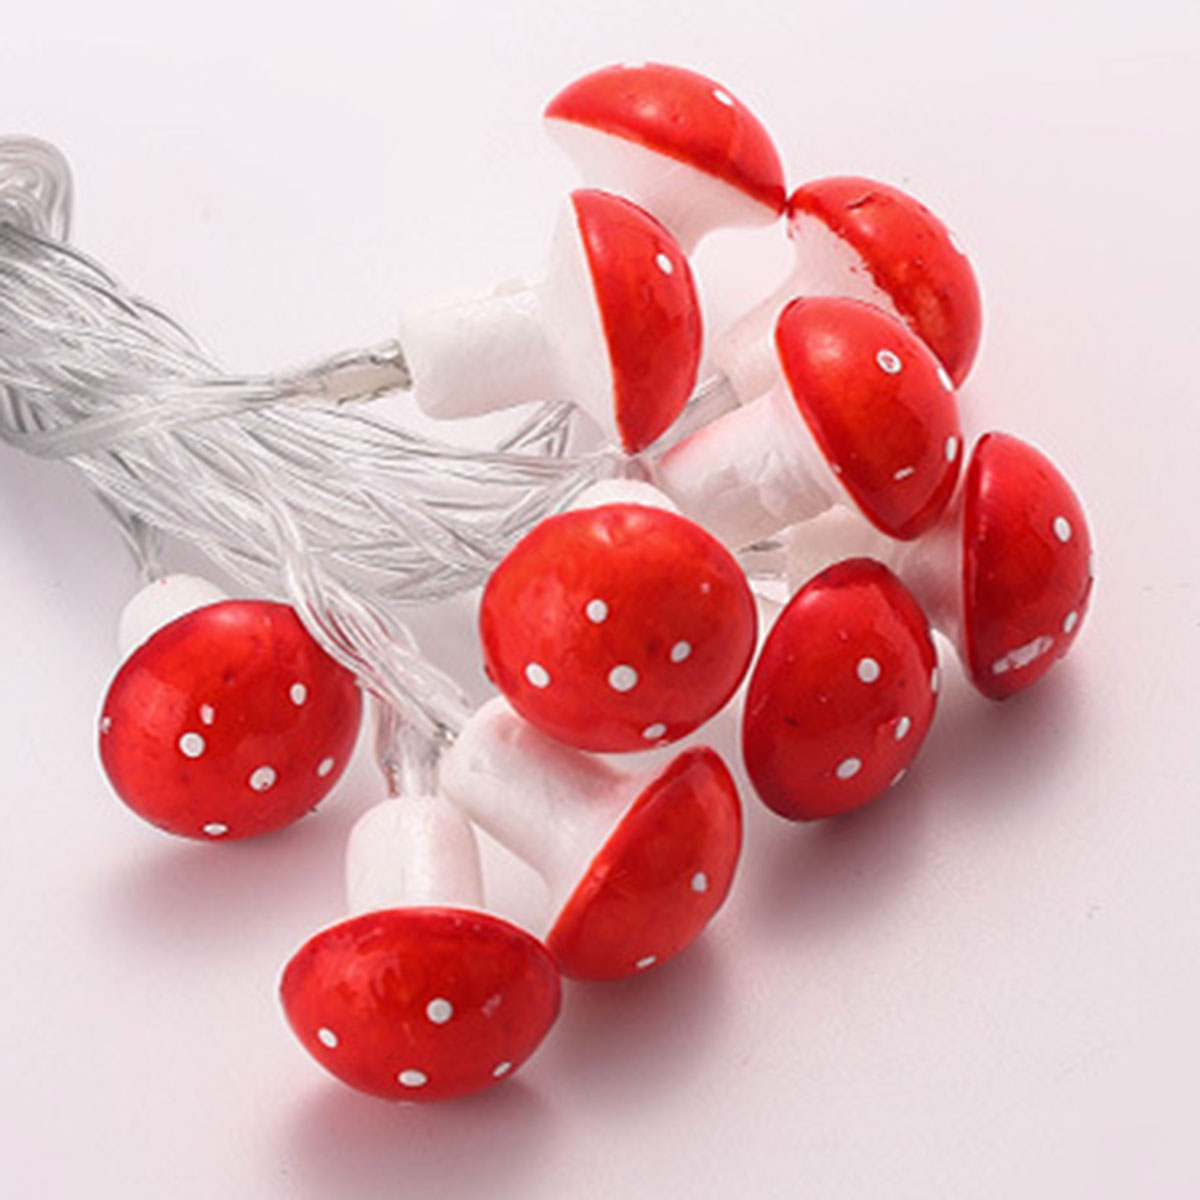 2/3M Mushroom Shape Wire String Light / Waterproof Battery Operated Led Lights for Christmas Wedding New Year Decoration